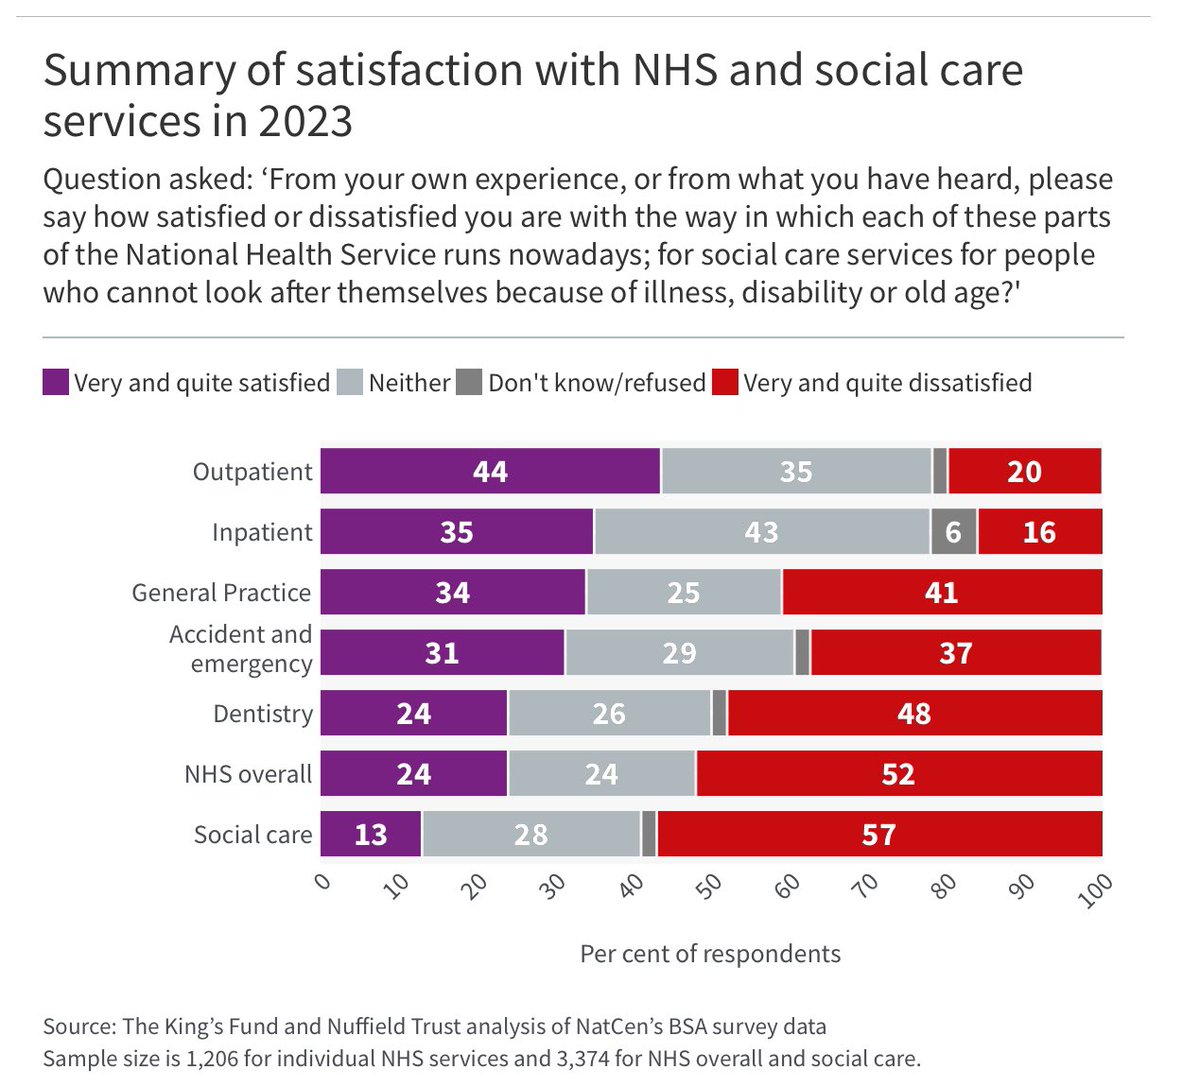 On Monday I wrote a short thread about public satisfaction with #socialcare, which has fallen to 13%. Today the numbers show satisfaction with the NHS, while historically very low, is still higher at 24%. Some individual NHS services do better: outpatients has 44% satisfaction.